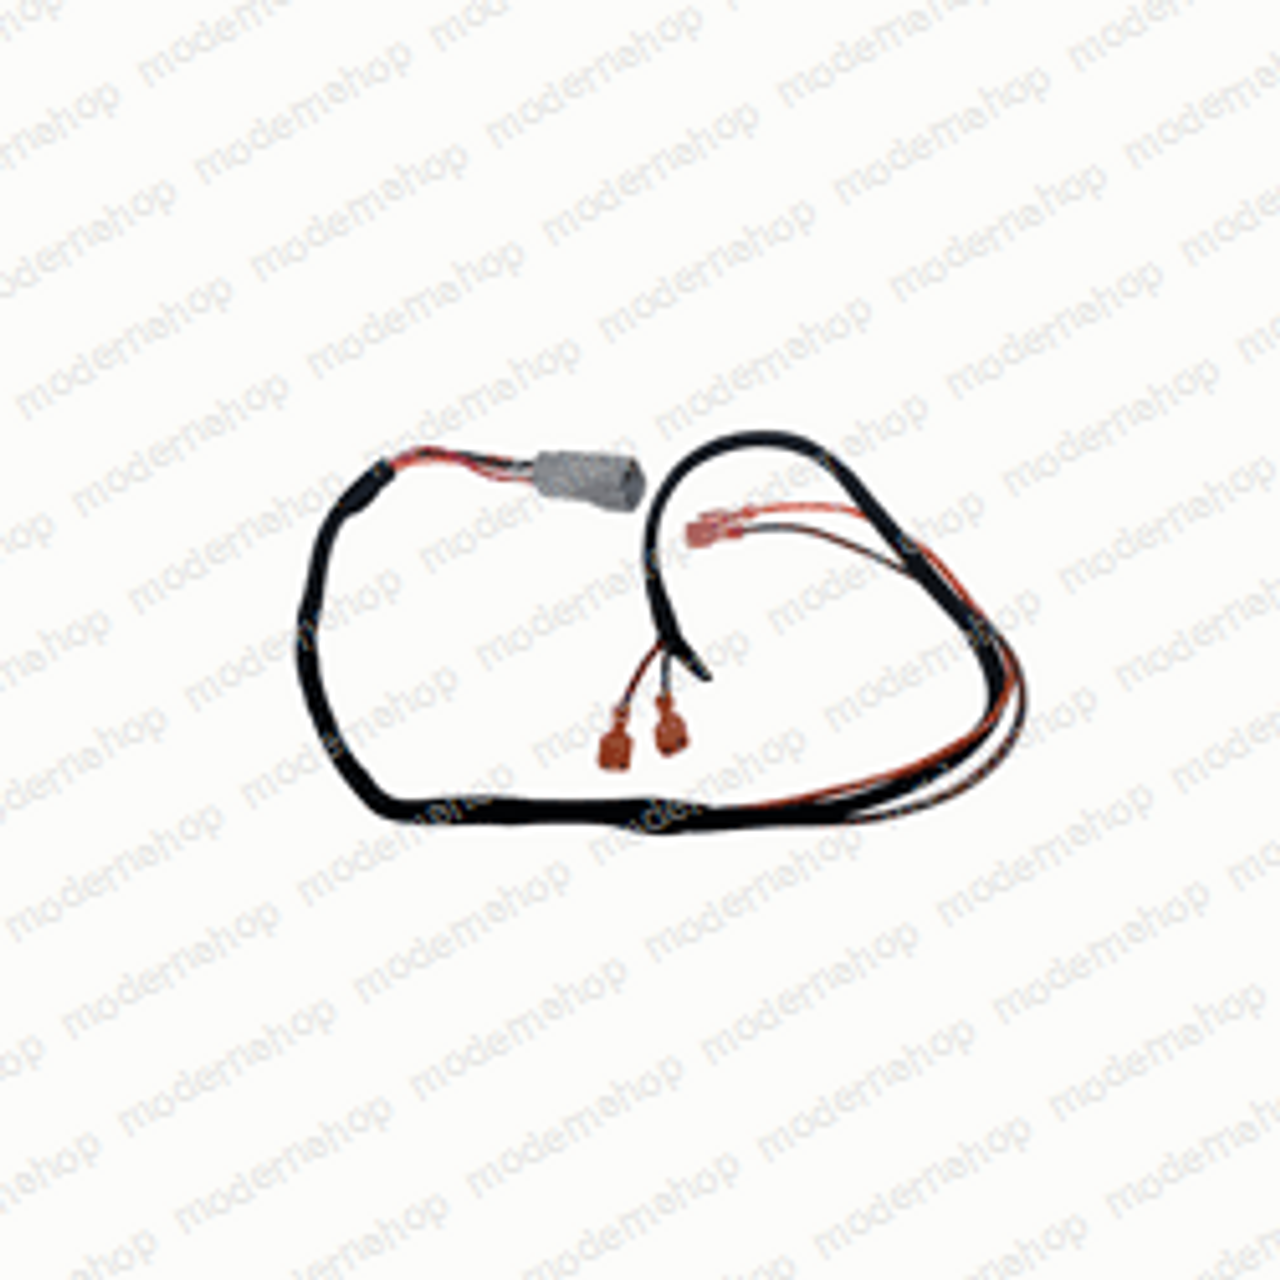 518798685: Yale Forklift HARNESS - WIRE